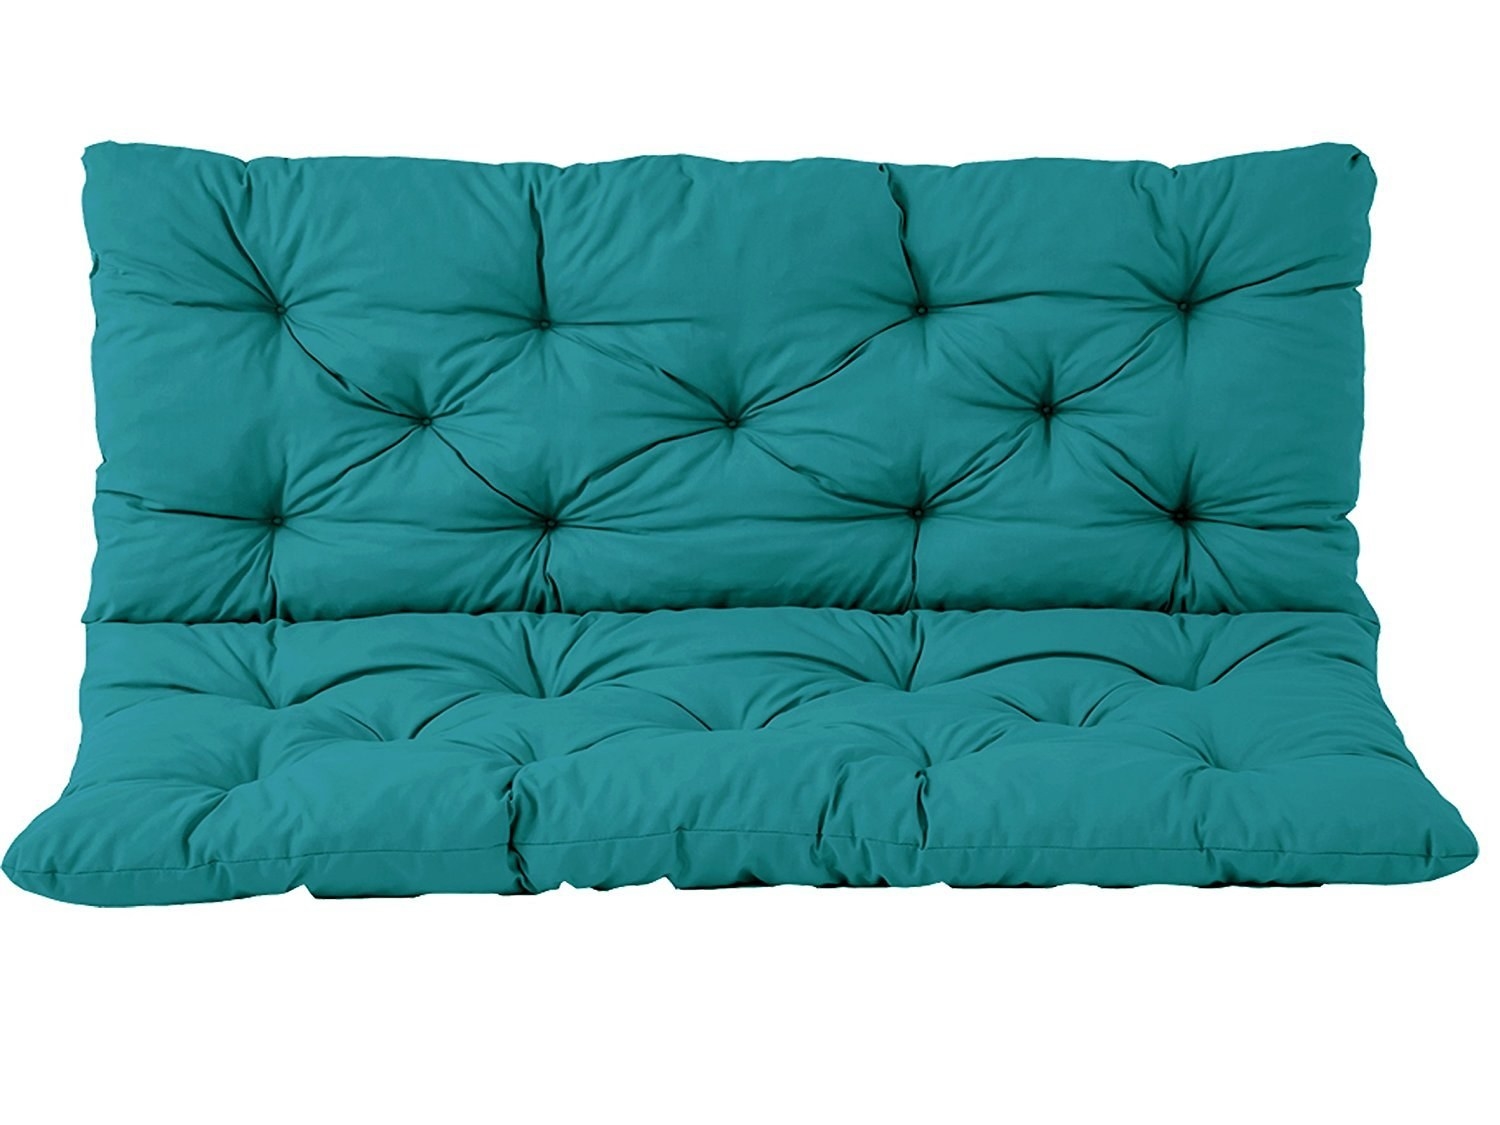 A blue two-seater cushion 